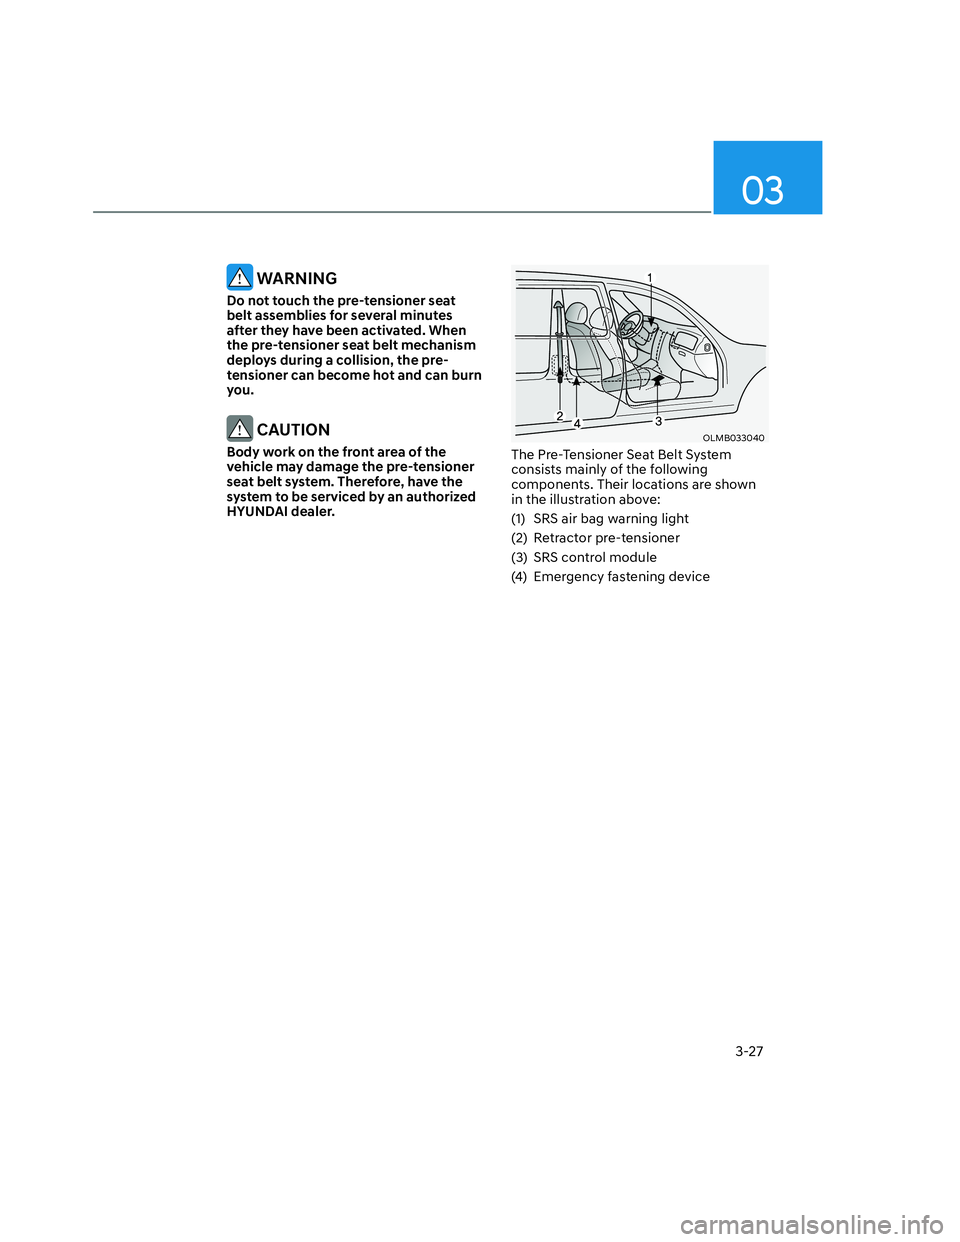 HYUNDAI SANTA CRUZ 2023  Owners Manual 03
3-27
 WARNING
Do not touch the pre-tensioner seat 
belt assemblies for several minutes 
after they have been activated. When 
the pre-tensioner seat belt mechanism 
deploys during a collision, the 